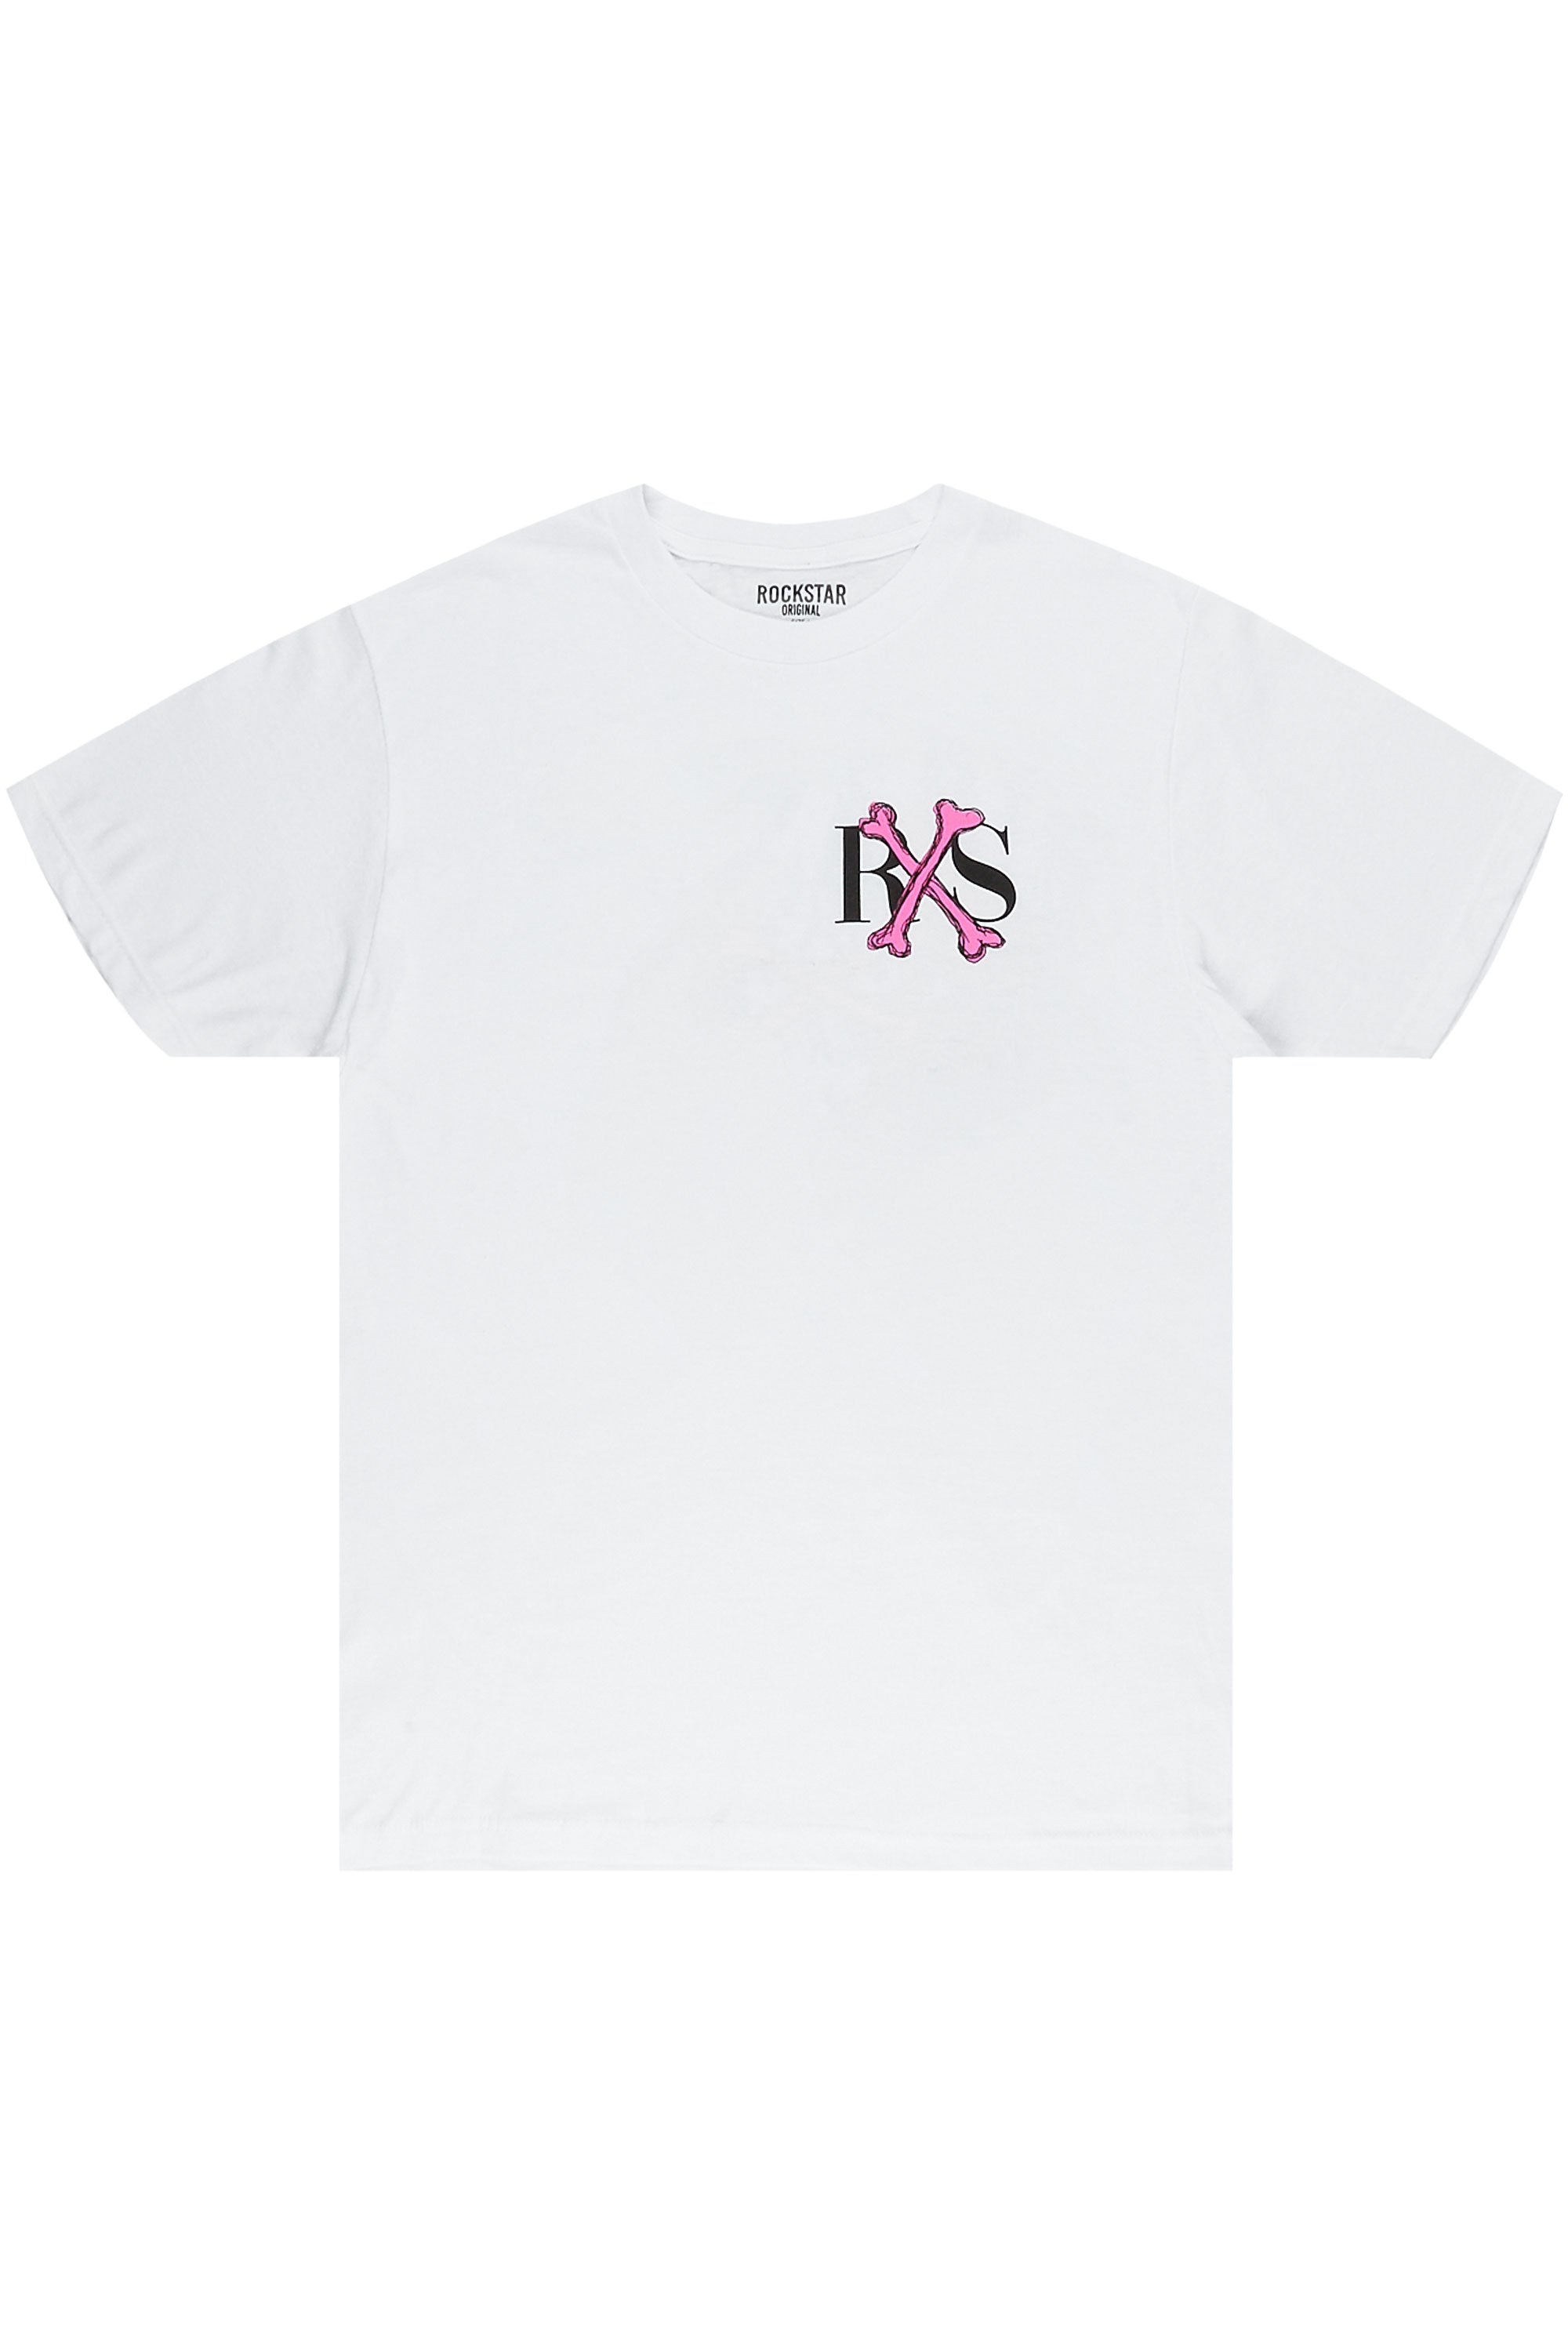 Cylens White Graphic T-Shirt